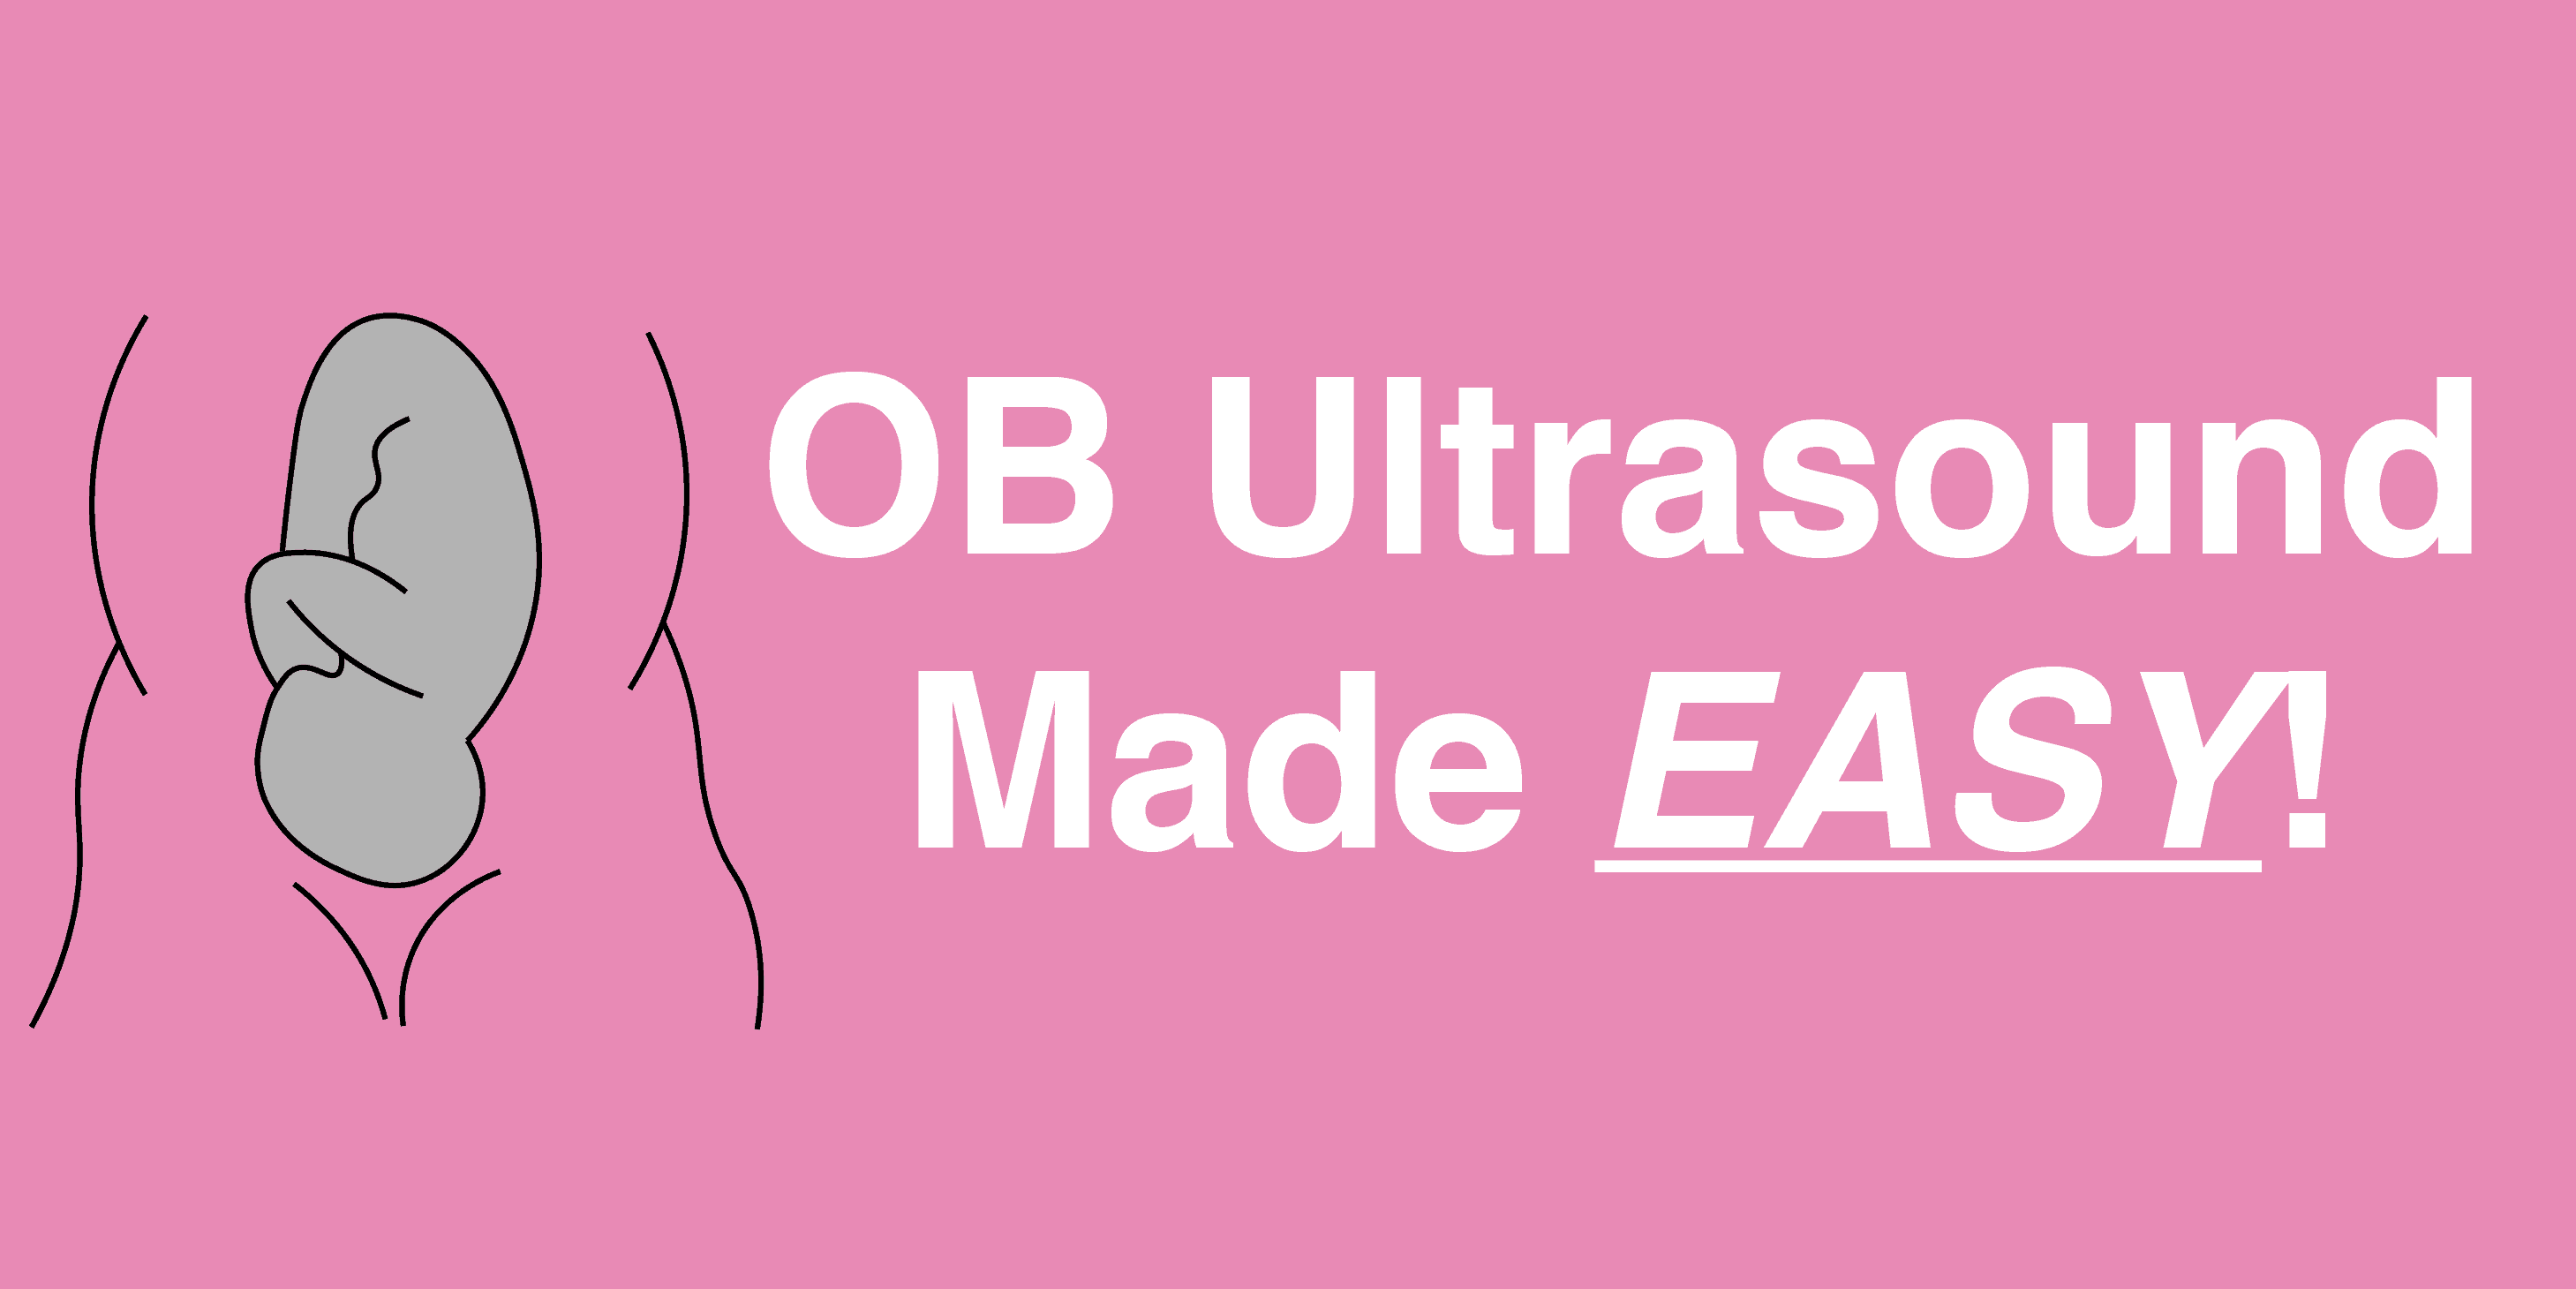 OB Obstetrics Obstetrical Obstetric Ultrasound Featured Image